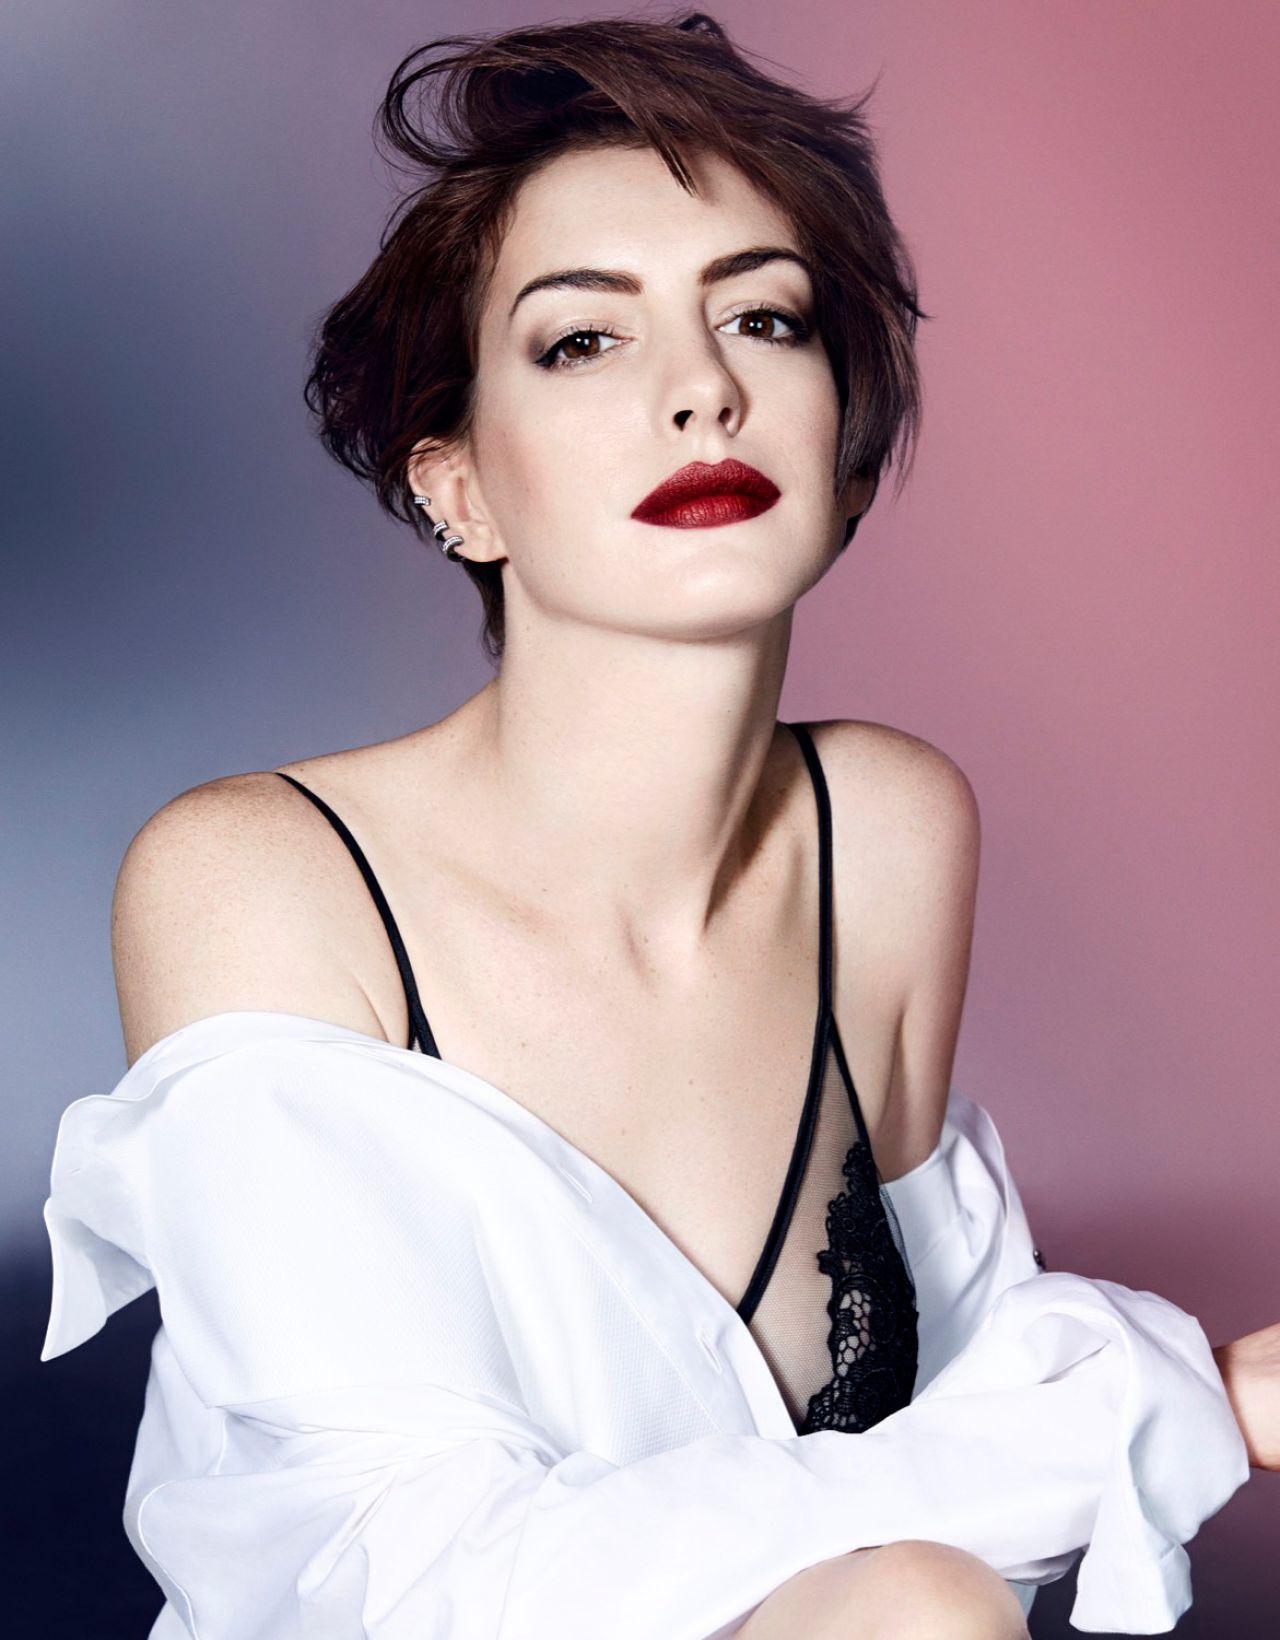 38 Hottest Bikini Pictures Of Anne Hathaway Are Just Too Damn Delicious | Best Of Comic Books